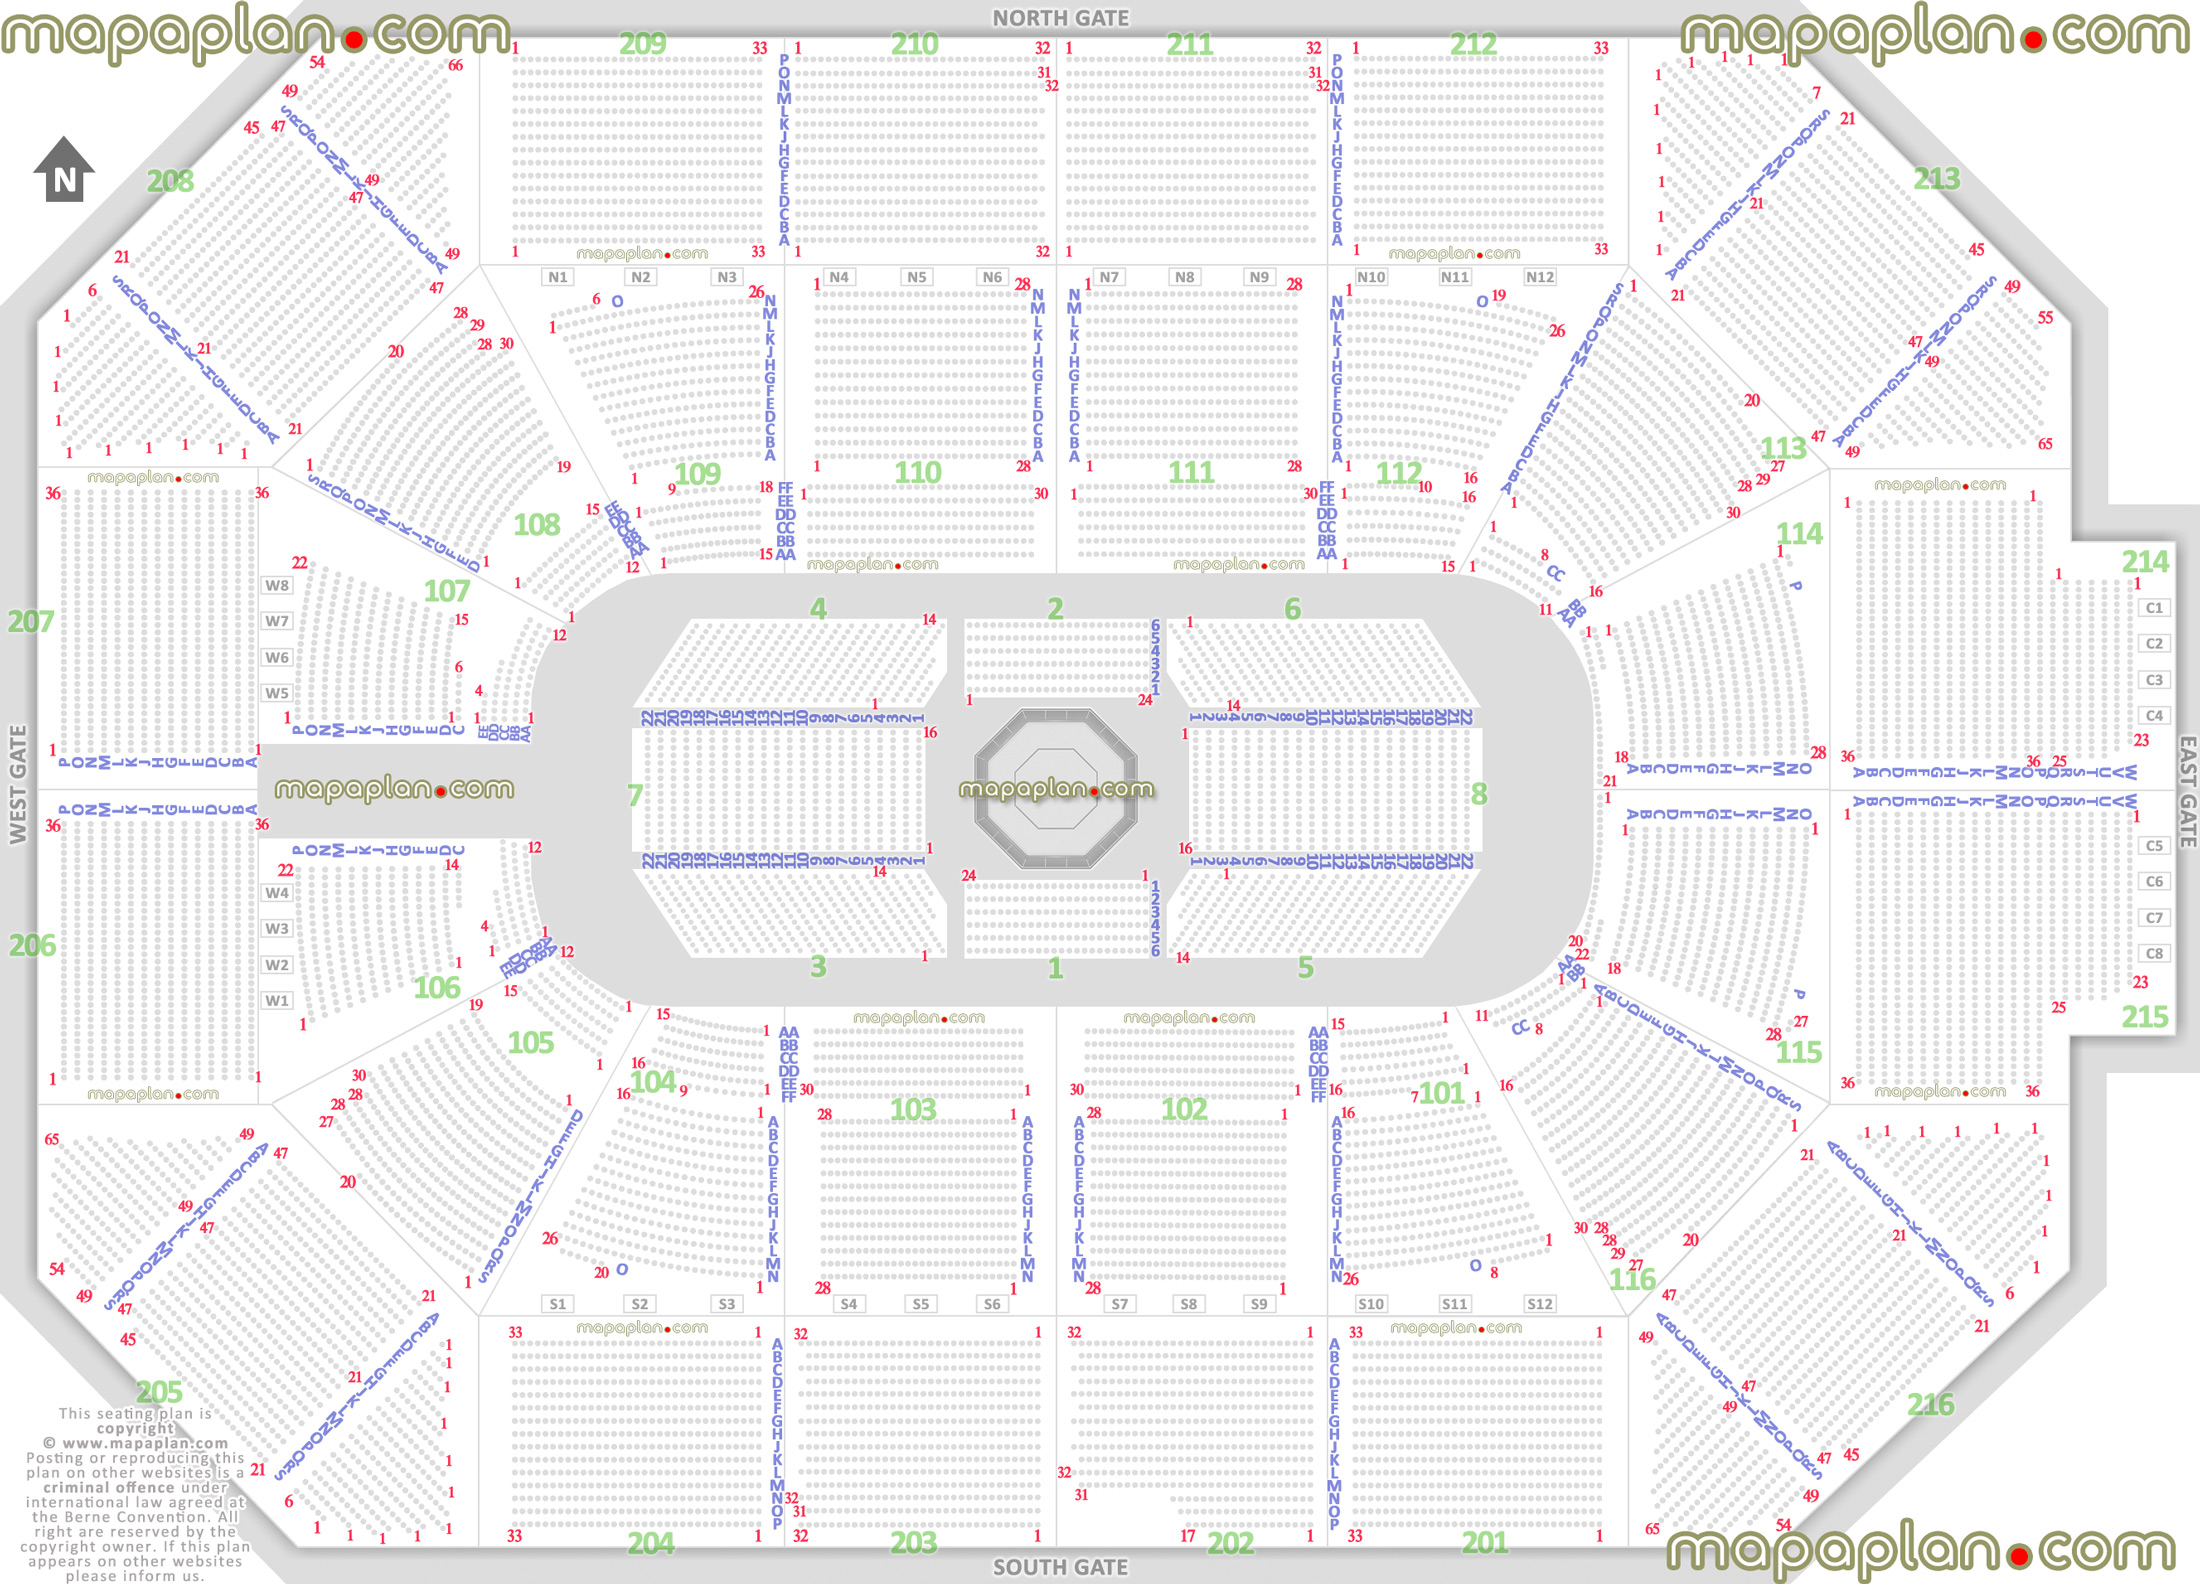 marvel universe live new show interactive best seat selection arrangement review diagram balcony sections 201 202 203 204 205 206 207 208 209 210 211 212 213 214 215 216aufc mma fights fully seated setup detailed chart viewer standing room only sro area main entrance gate map exits wheelchair disabled handicap accessible seats Rosemont Allstate Arena seating chart